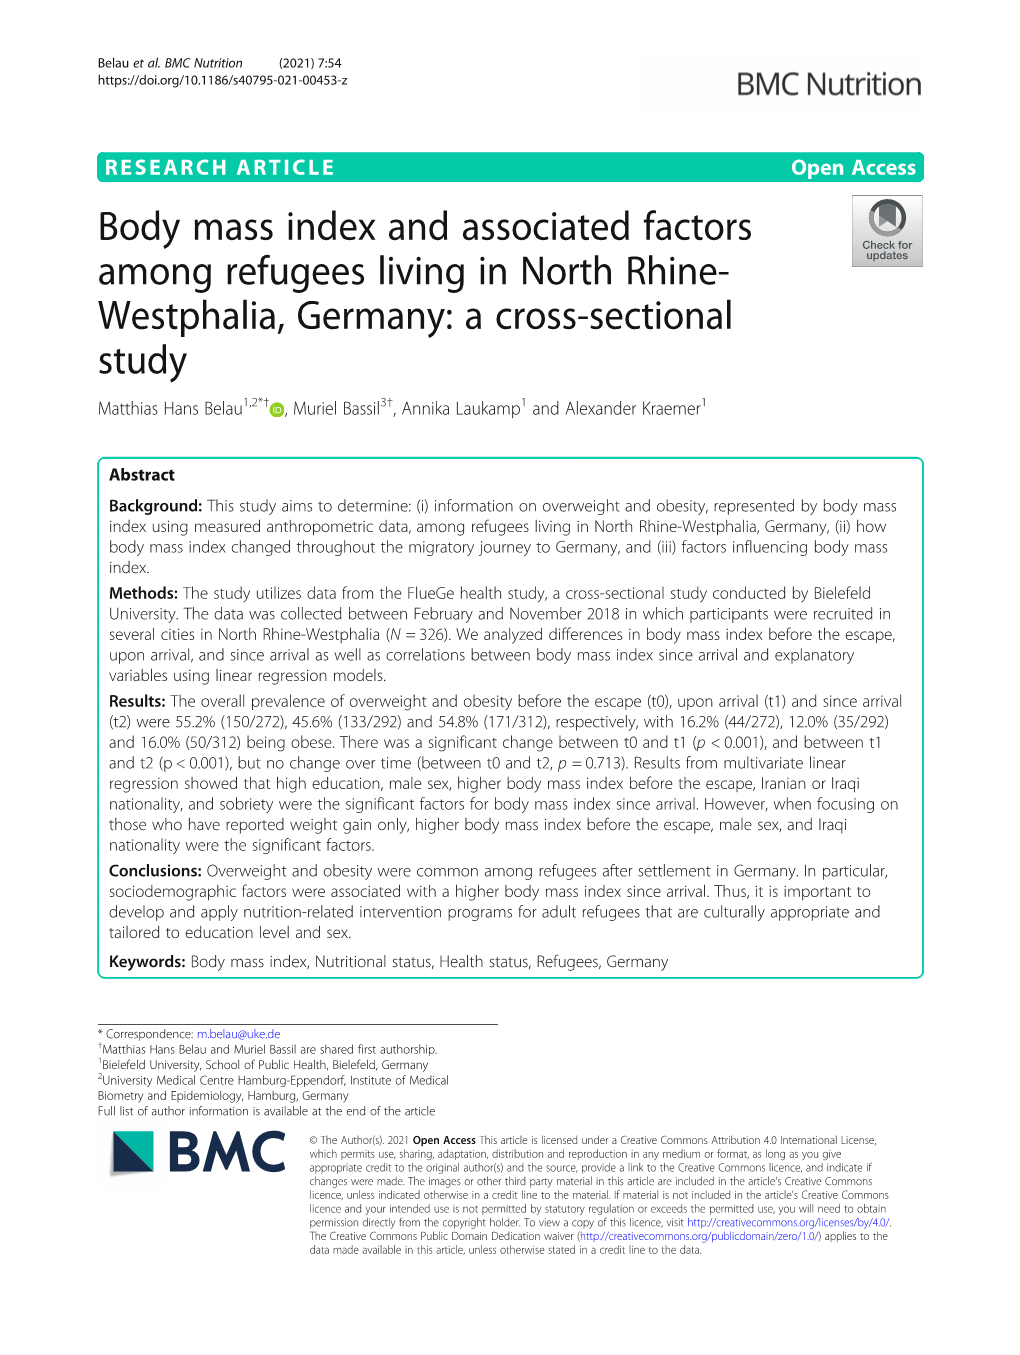 Body Mass Index and Associated Factors Among Refugees Living In